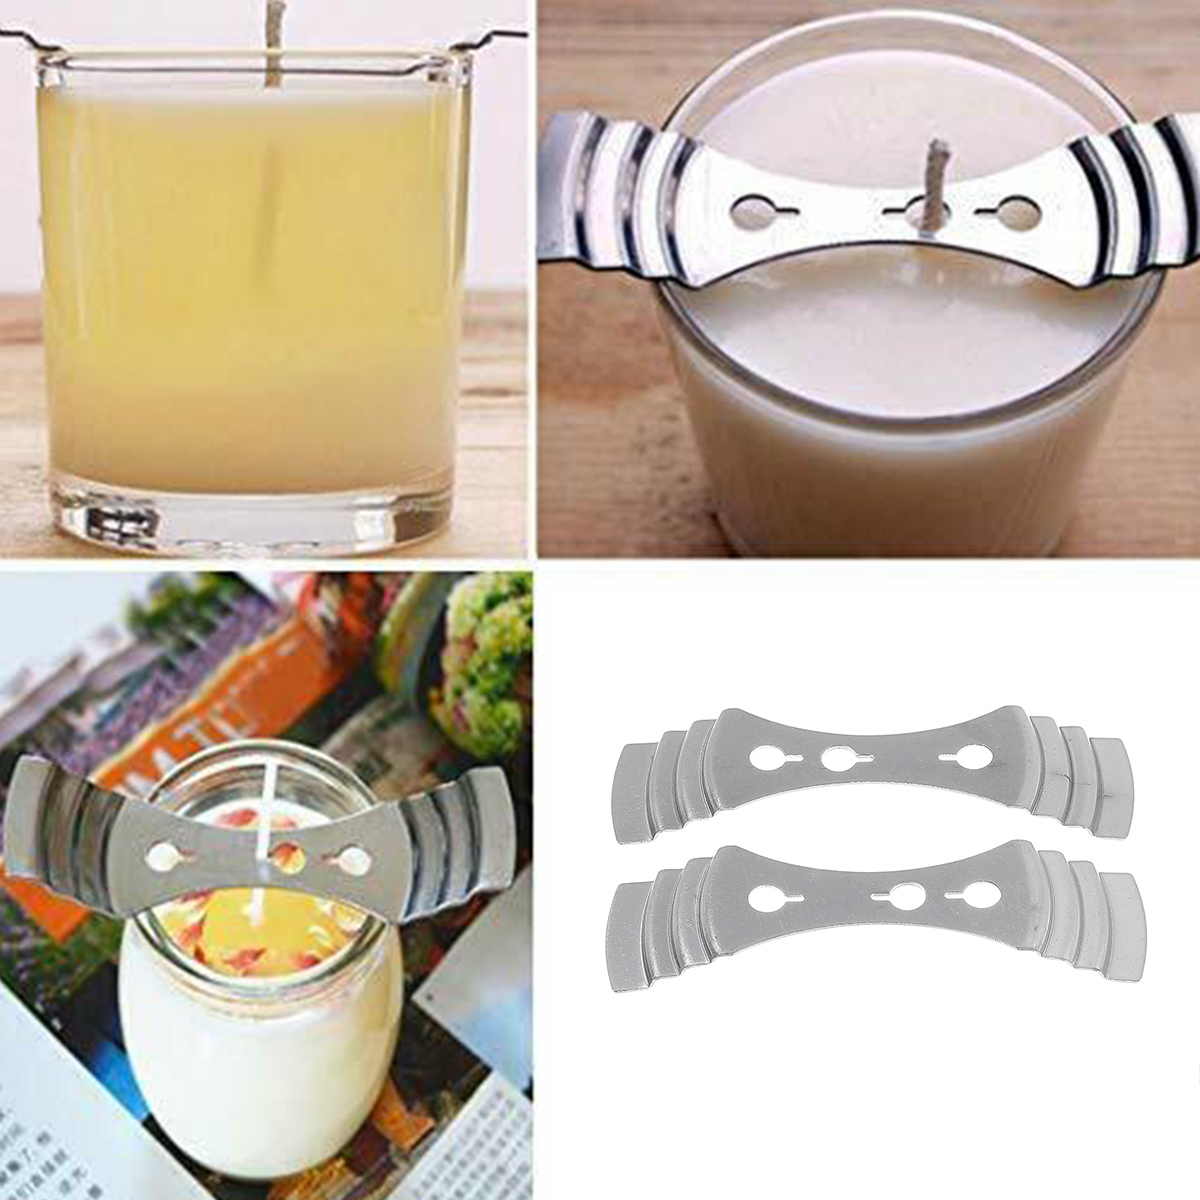 Candle-Making-Tool-DIY-Candle-Material-Stainless-Steel-Wax-Pot-Scale-Wax-Cup-Set-1816137-10